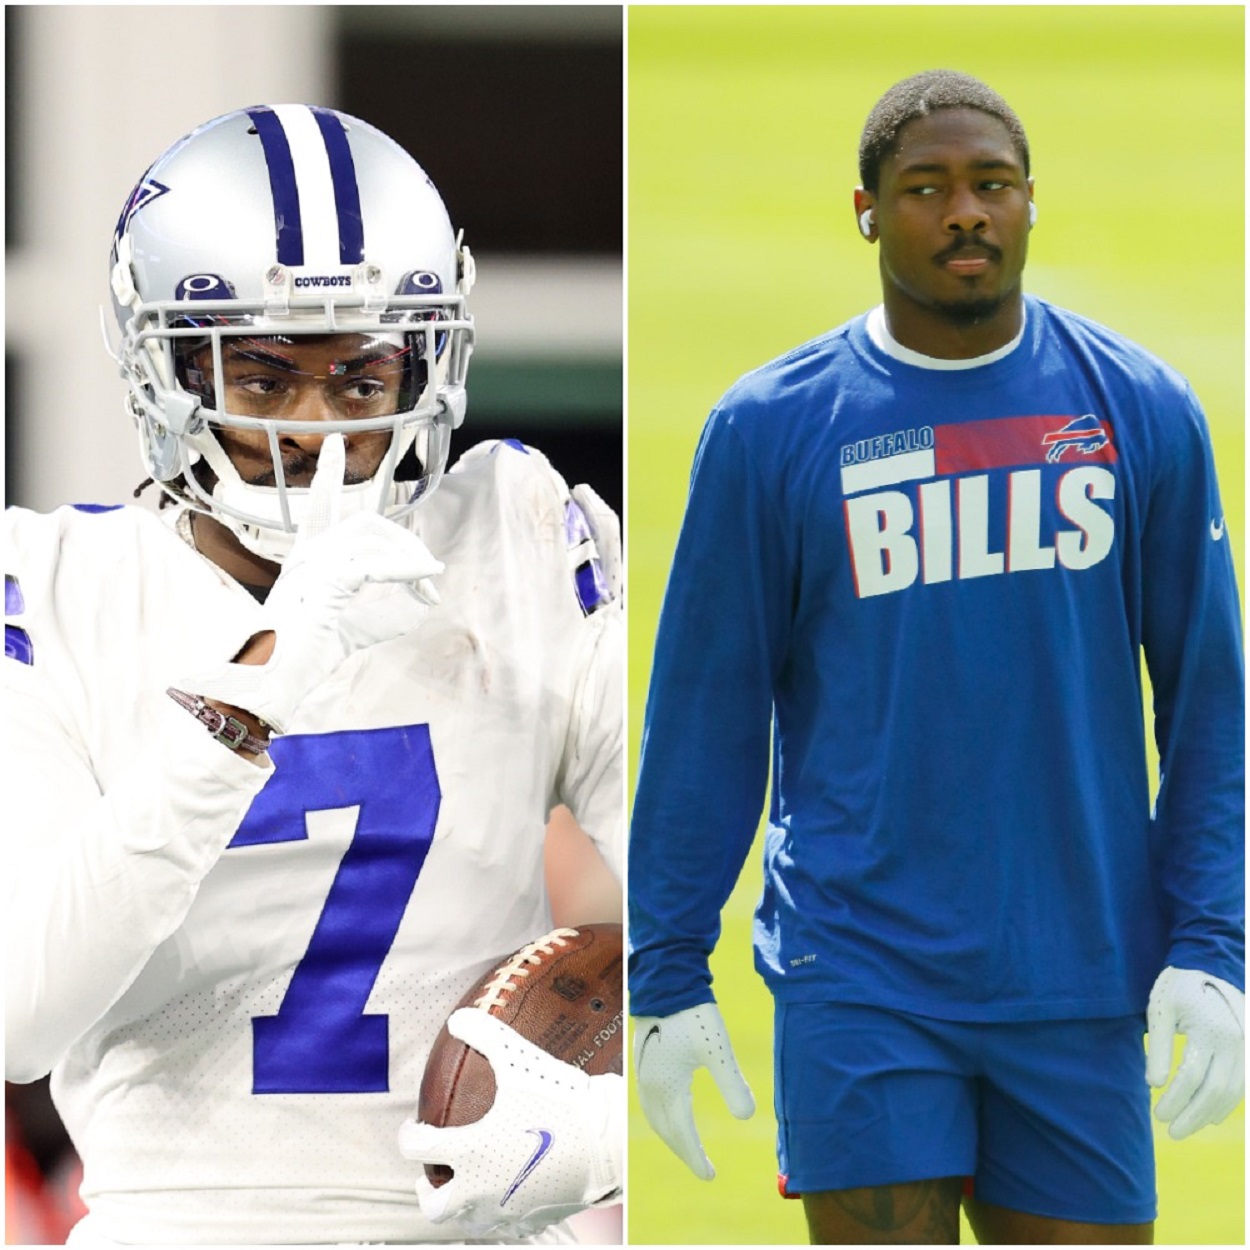 Cowboys Corner Trevon Diggs Is Outscoring His Brother Stefon Diggs and Setting up a Potential Family Feud